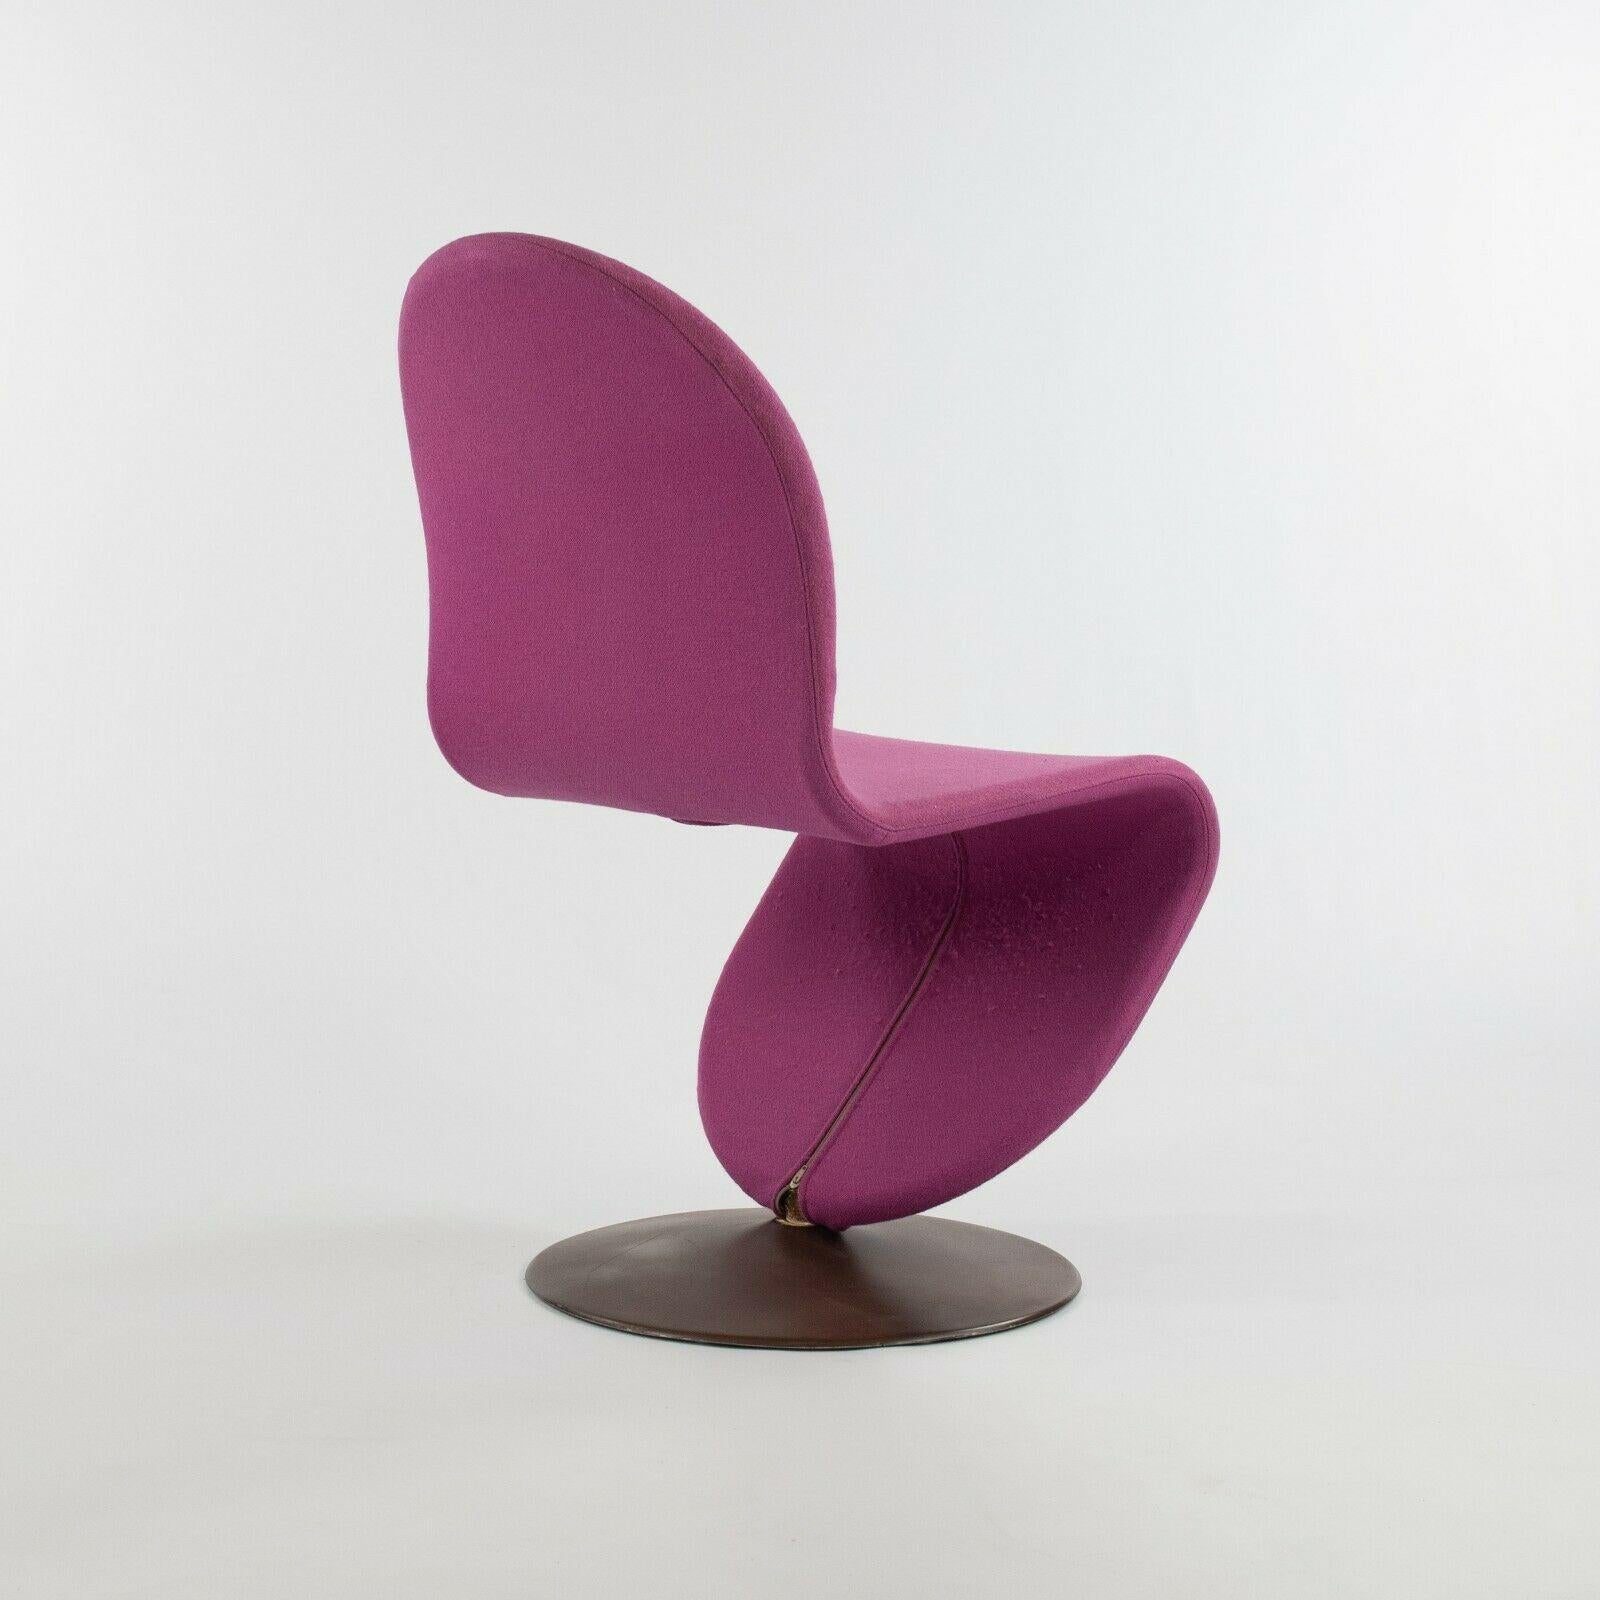 Modern 1970s Verner Panton for Fritz Hansen 1-2-3 Dining Side Chair in Magenta Fabric For Sale